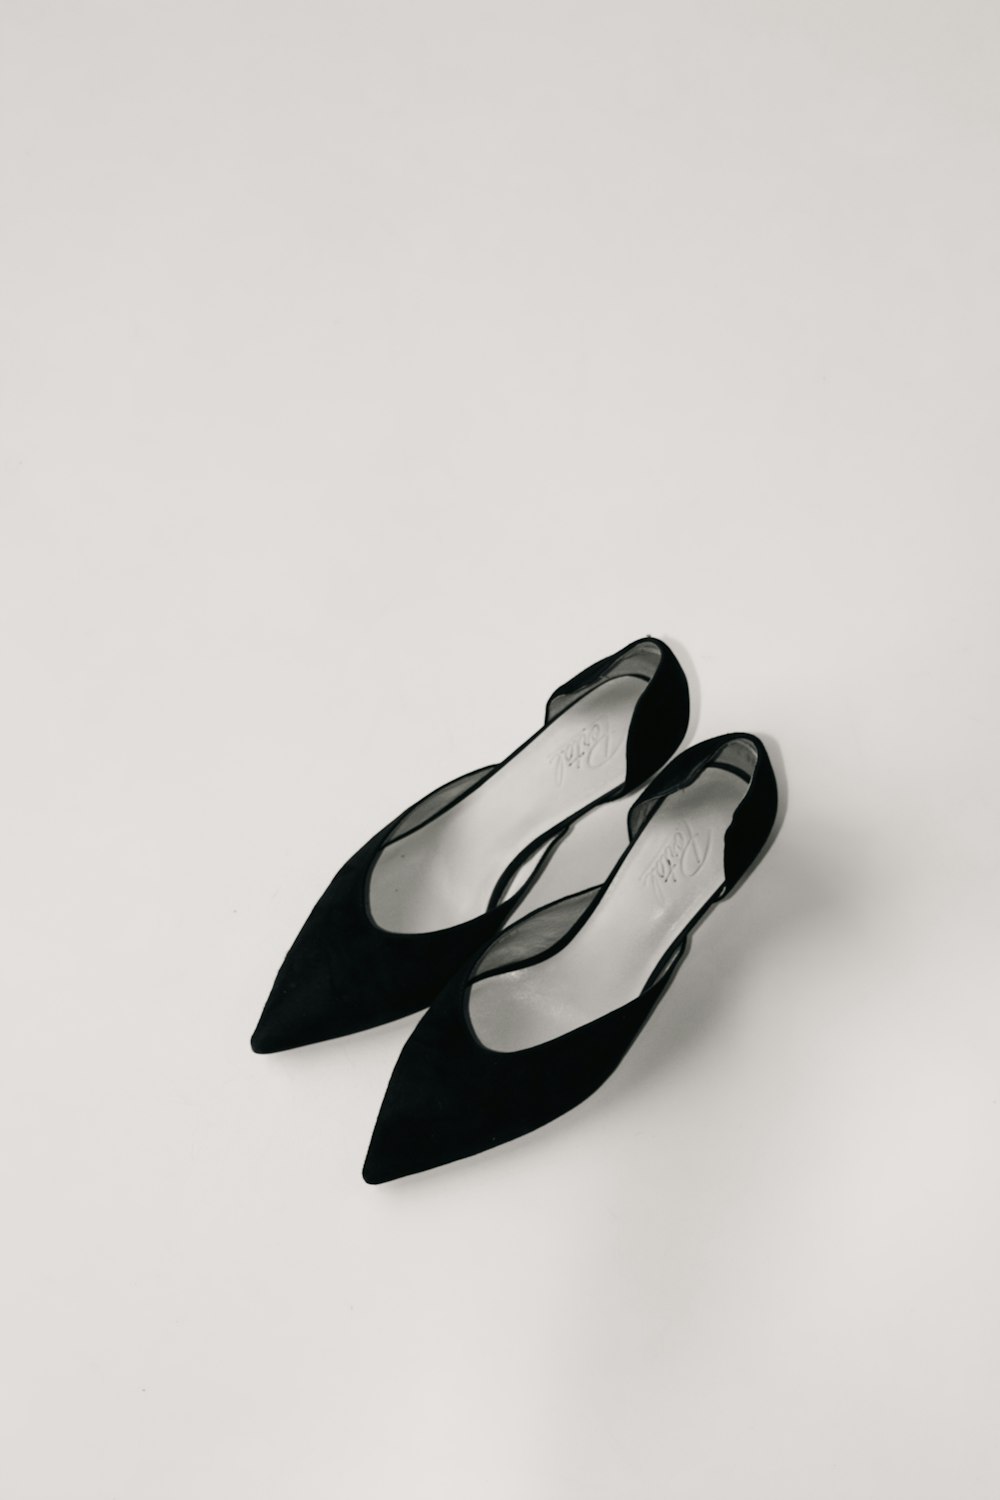 a pair of black shoes sitting on top of a white surface